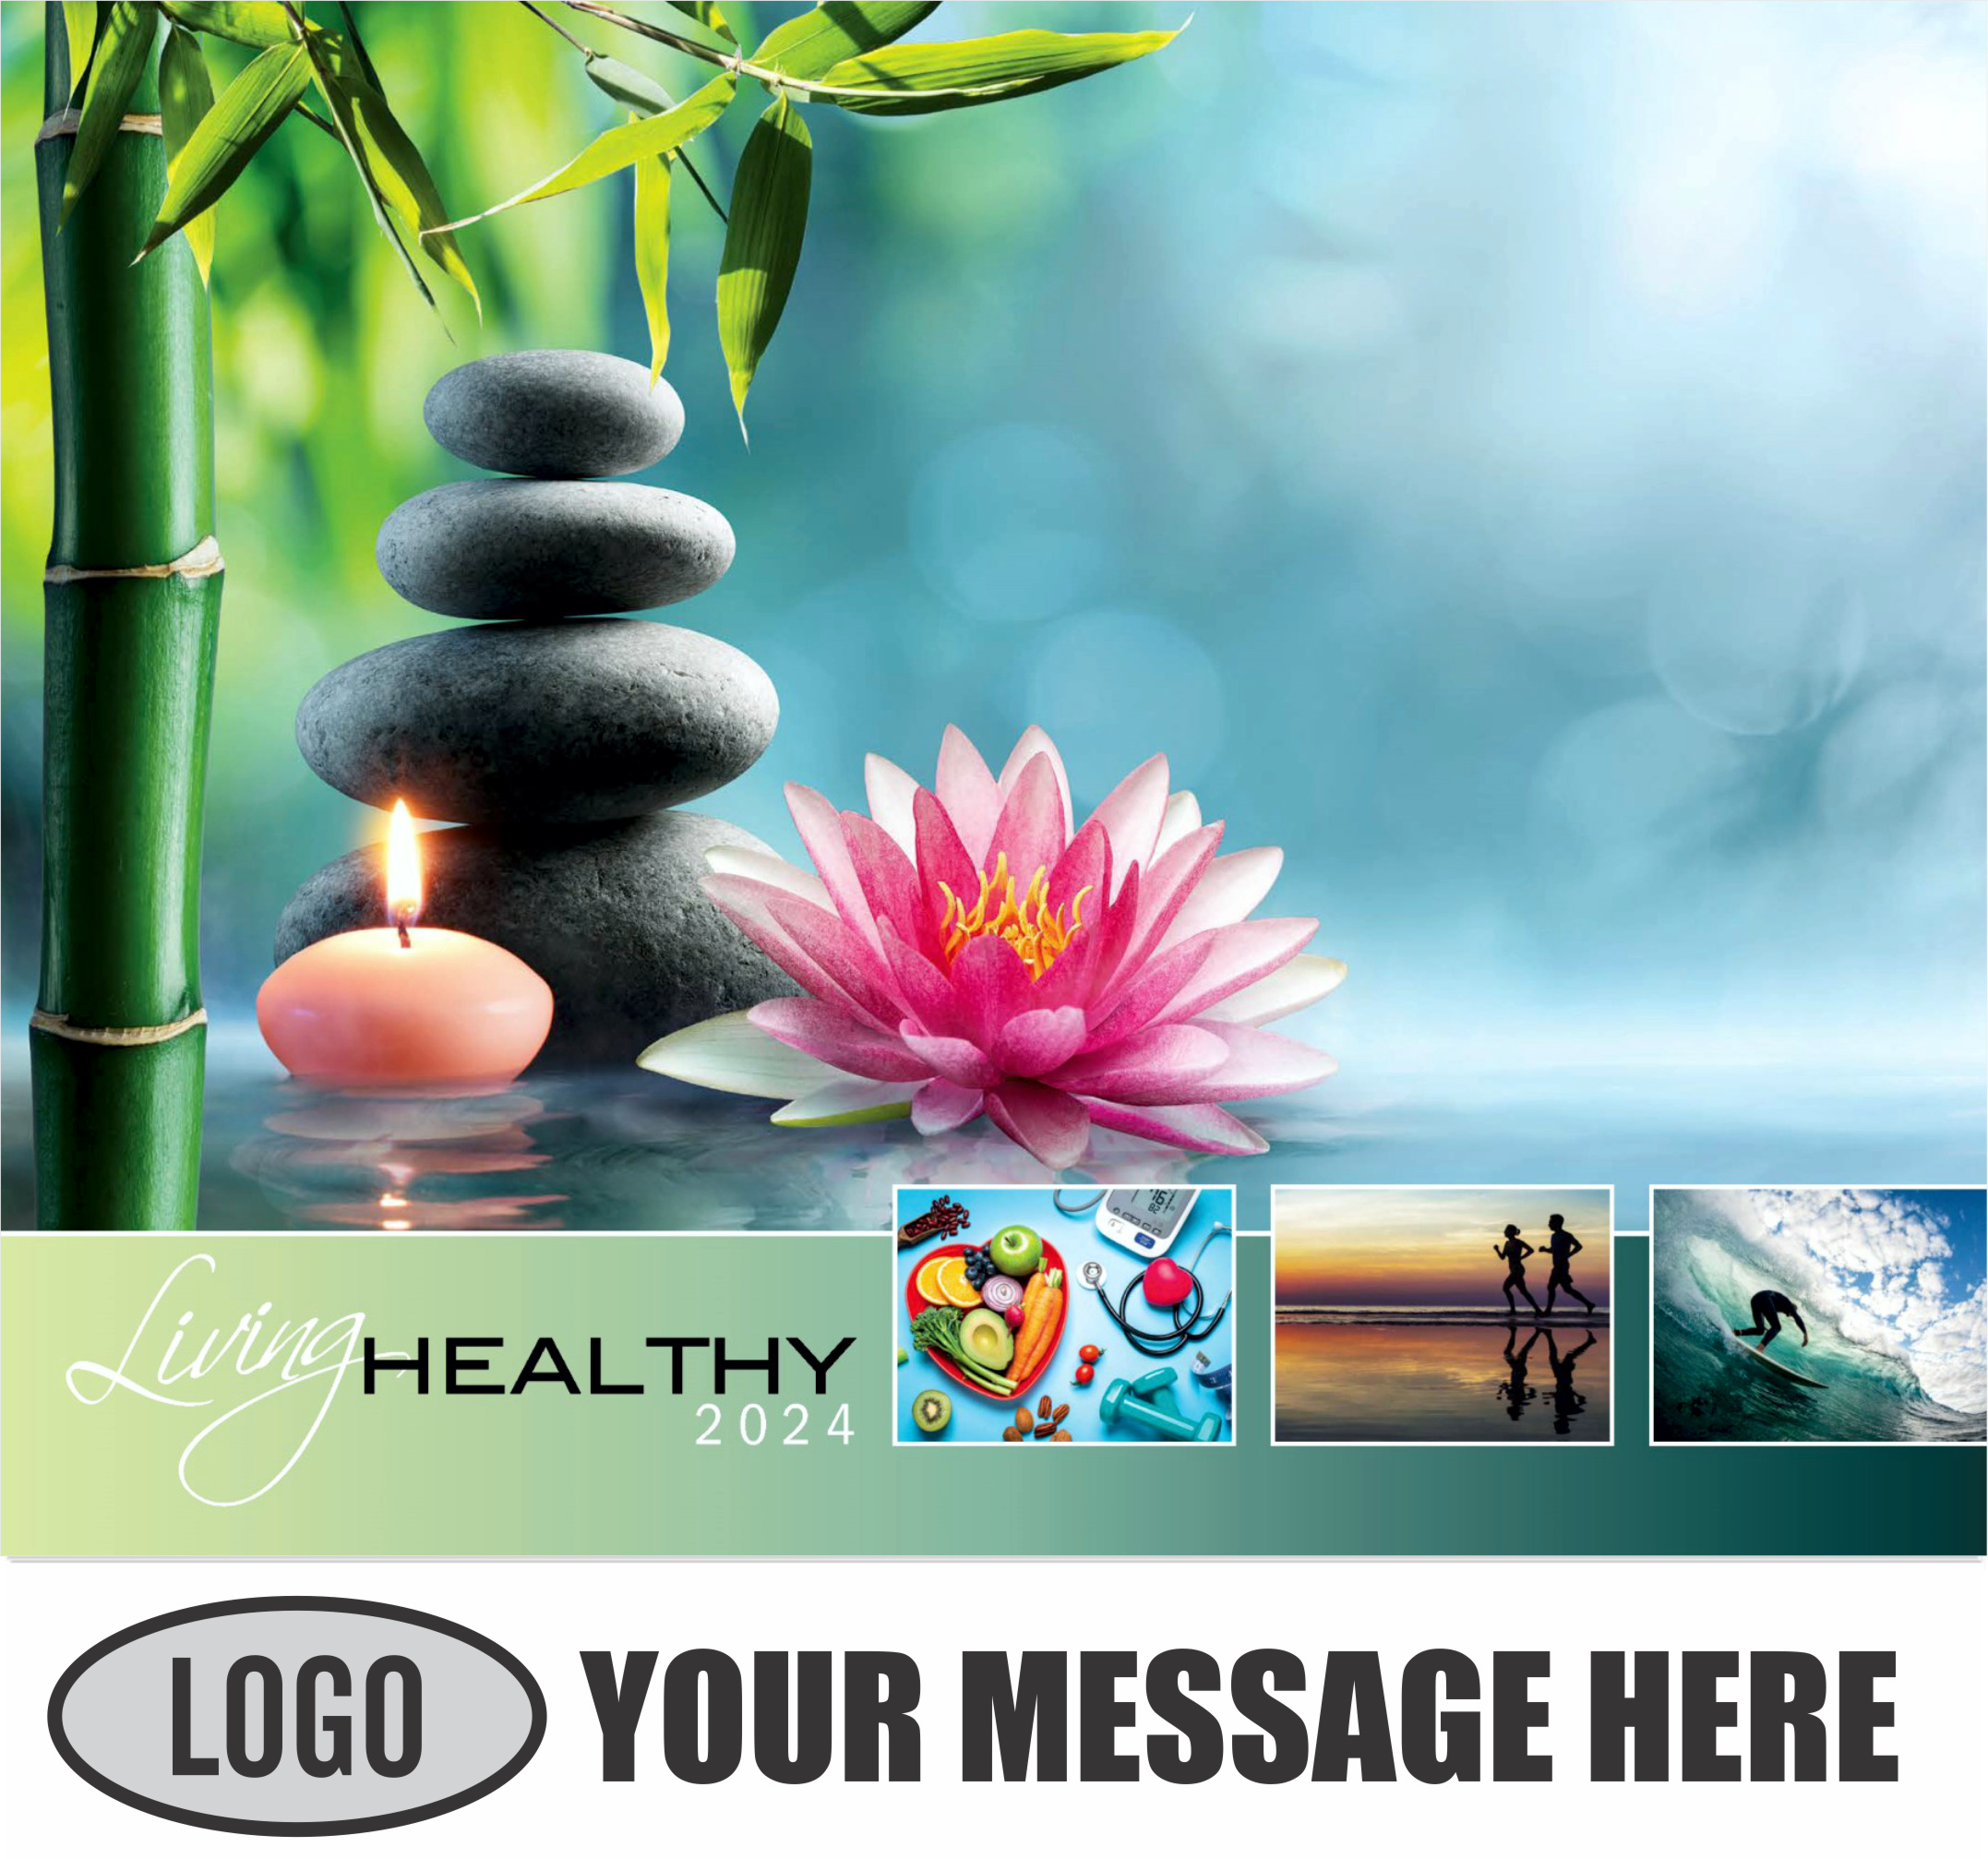 Living Healthy 2024 Business Promotional Calendar - cover